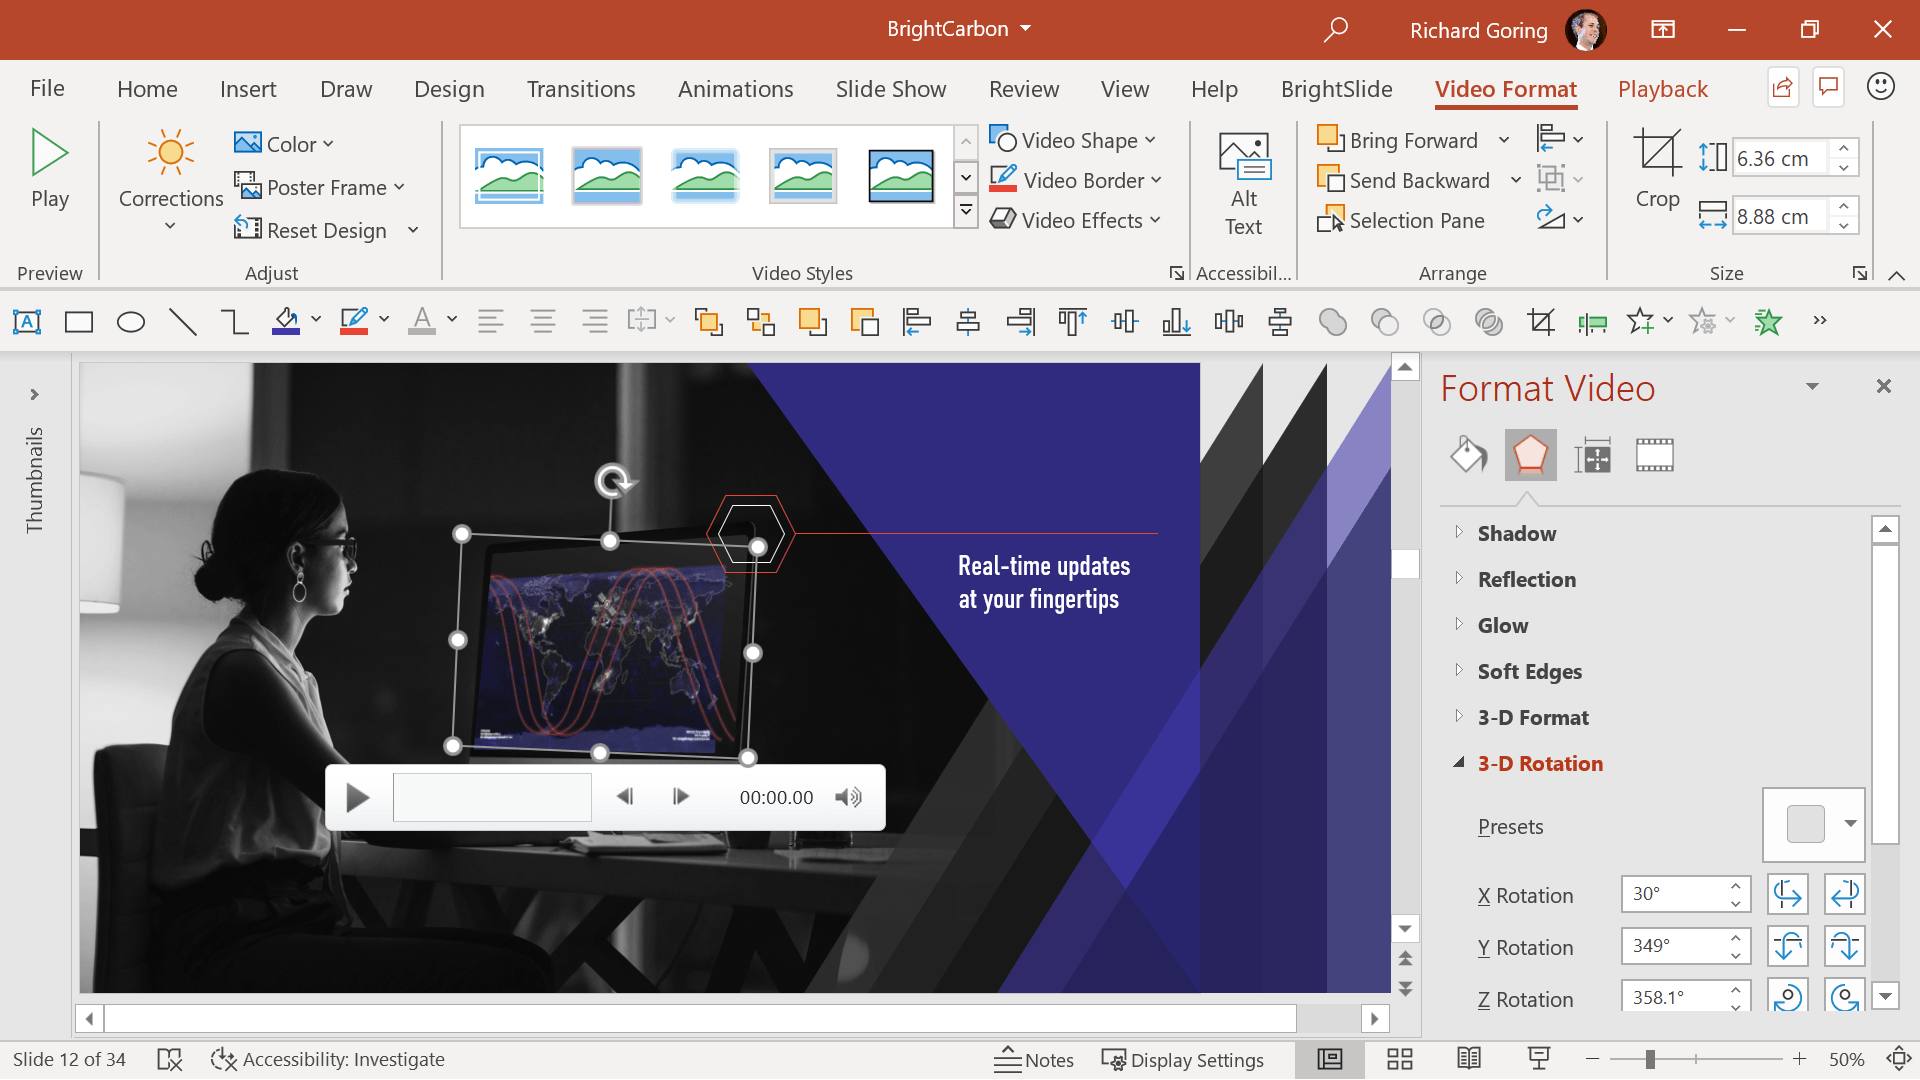 how to add video to powerpoint start at a certain time